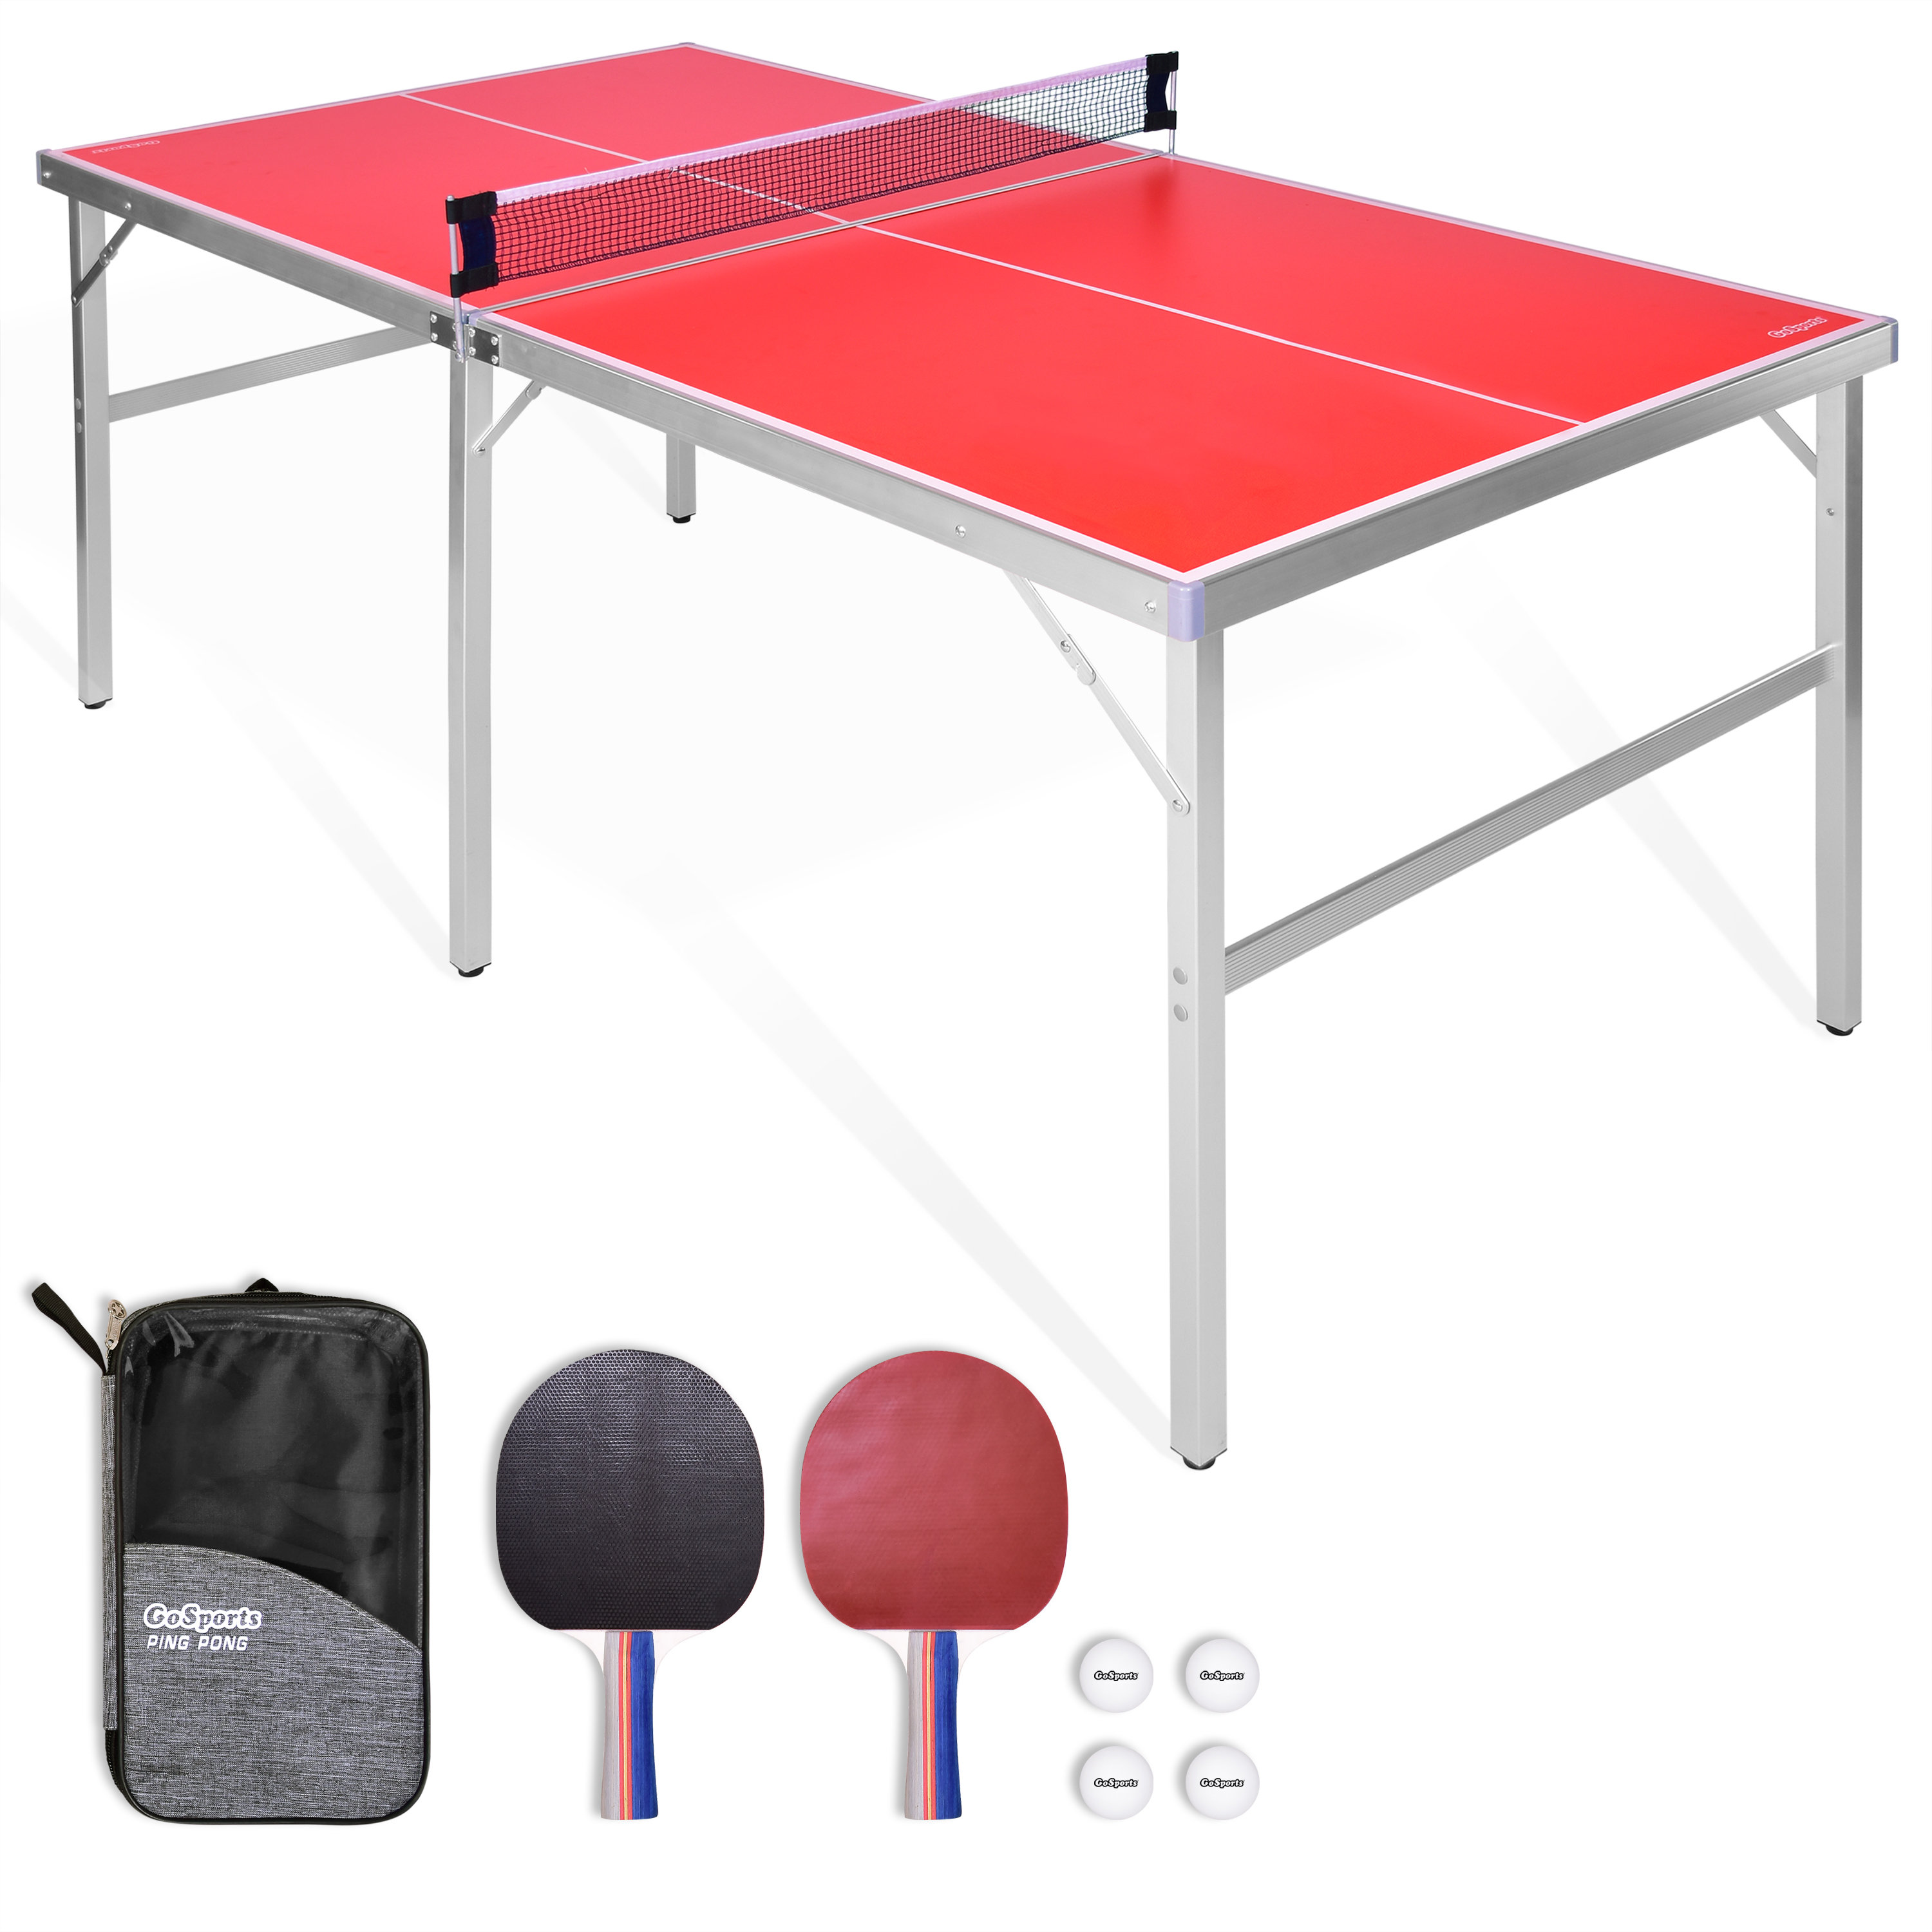 Details about   Ping Pong Table Tennis Folding Huge Size Game Set Indoor Outdoor Sport Full Set 